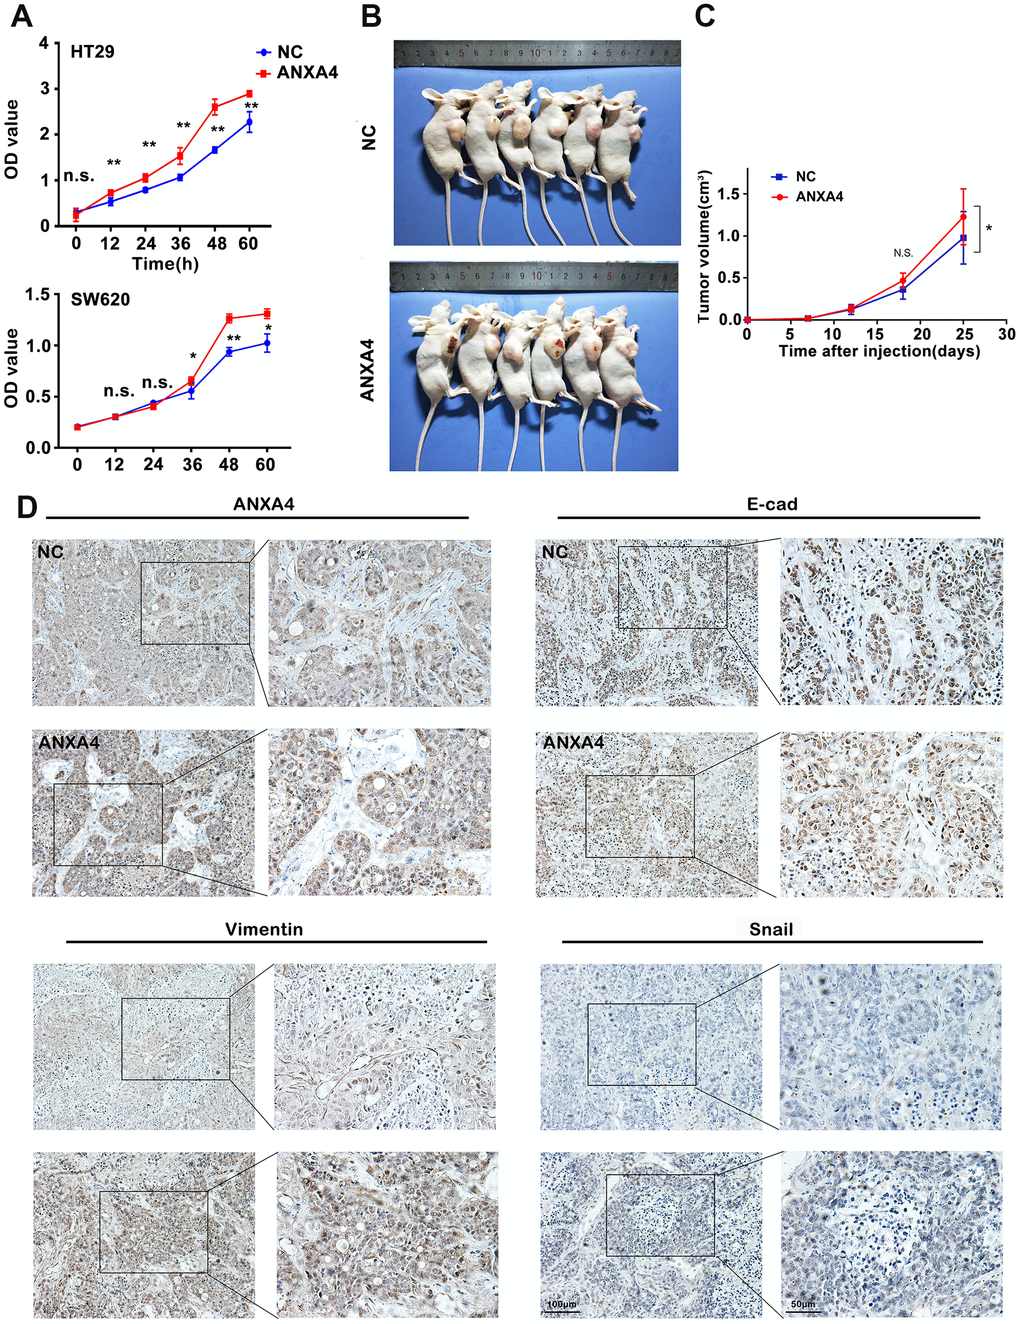 ANXA4 promotes tumorigenesis and EMT in a xenograft model. (A) CCK8 assay assessing the viability of HT-29 cells transfected with HA-ANXA4. The data are shown as the mean ± SEM of three independent experiments. *p B) HT-29 cells stably transfected with ANXA4 were subcutaneously injected into six nude mice (2×106/120 μl per mouse). After 25 days, the mice were sacrificed, and the tumours were removed. (C) Tumour growth curves of the xenograft tumours (n=6). Tumour volume was calculated at different time points (7, 12, 18, and 25 days) using the formula V=(a×b2)/2. *p D) Protein expression levels of ANXA4 and the EMT-related molecules E-cadherin, Vimentin, and Snail in tumours determined by IHC.